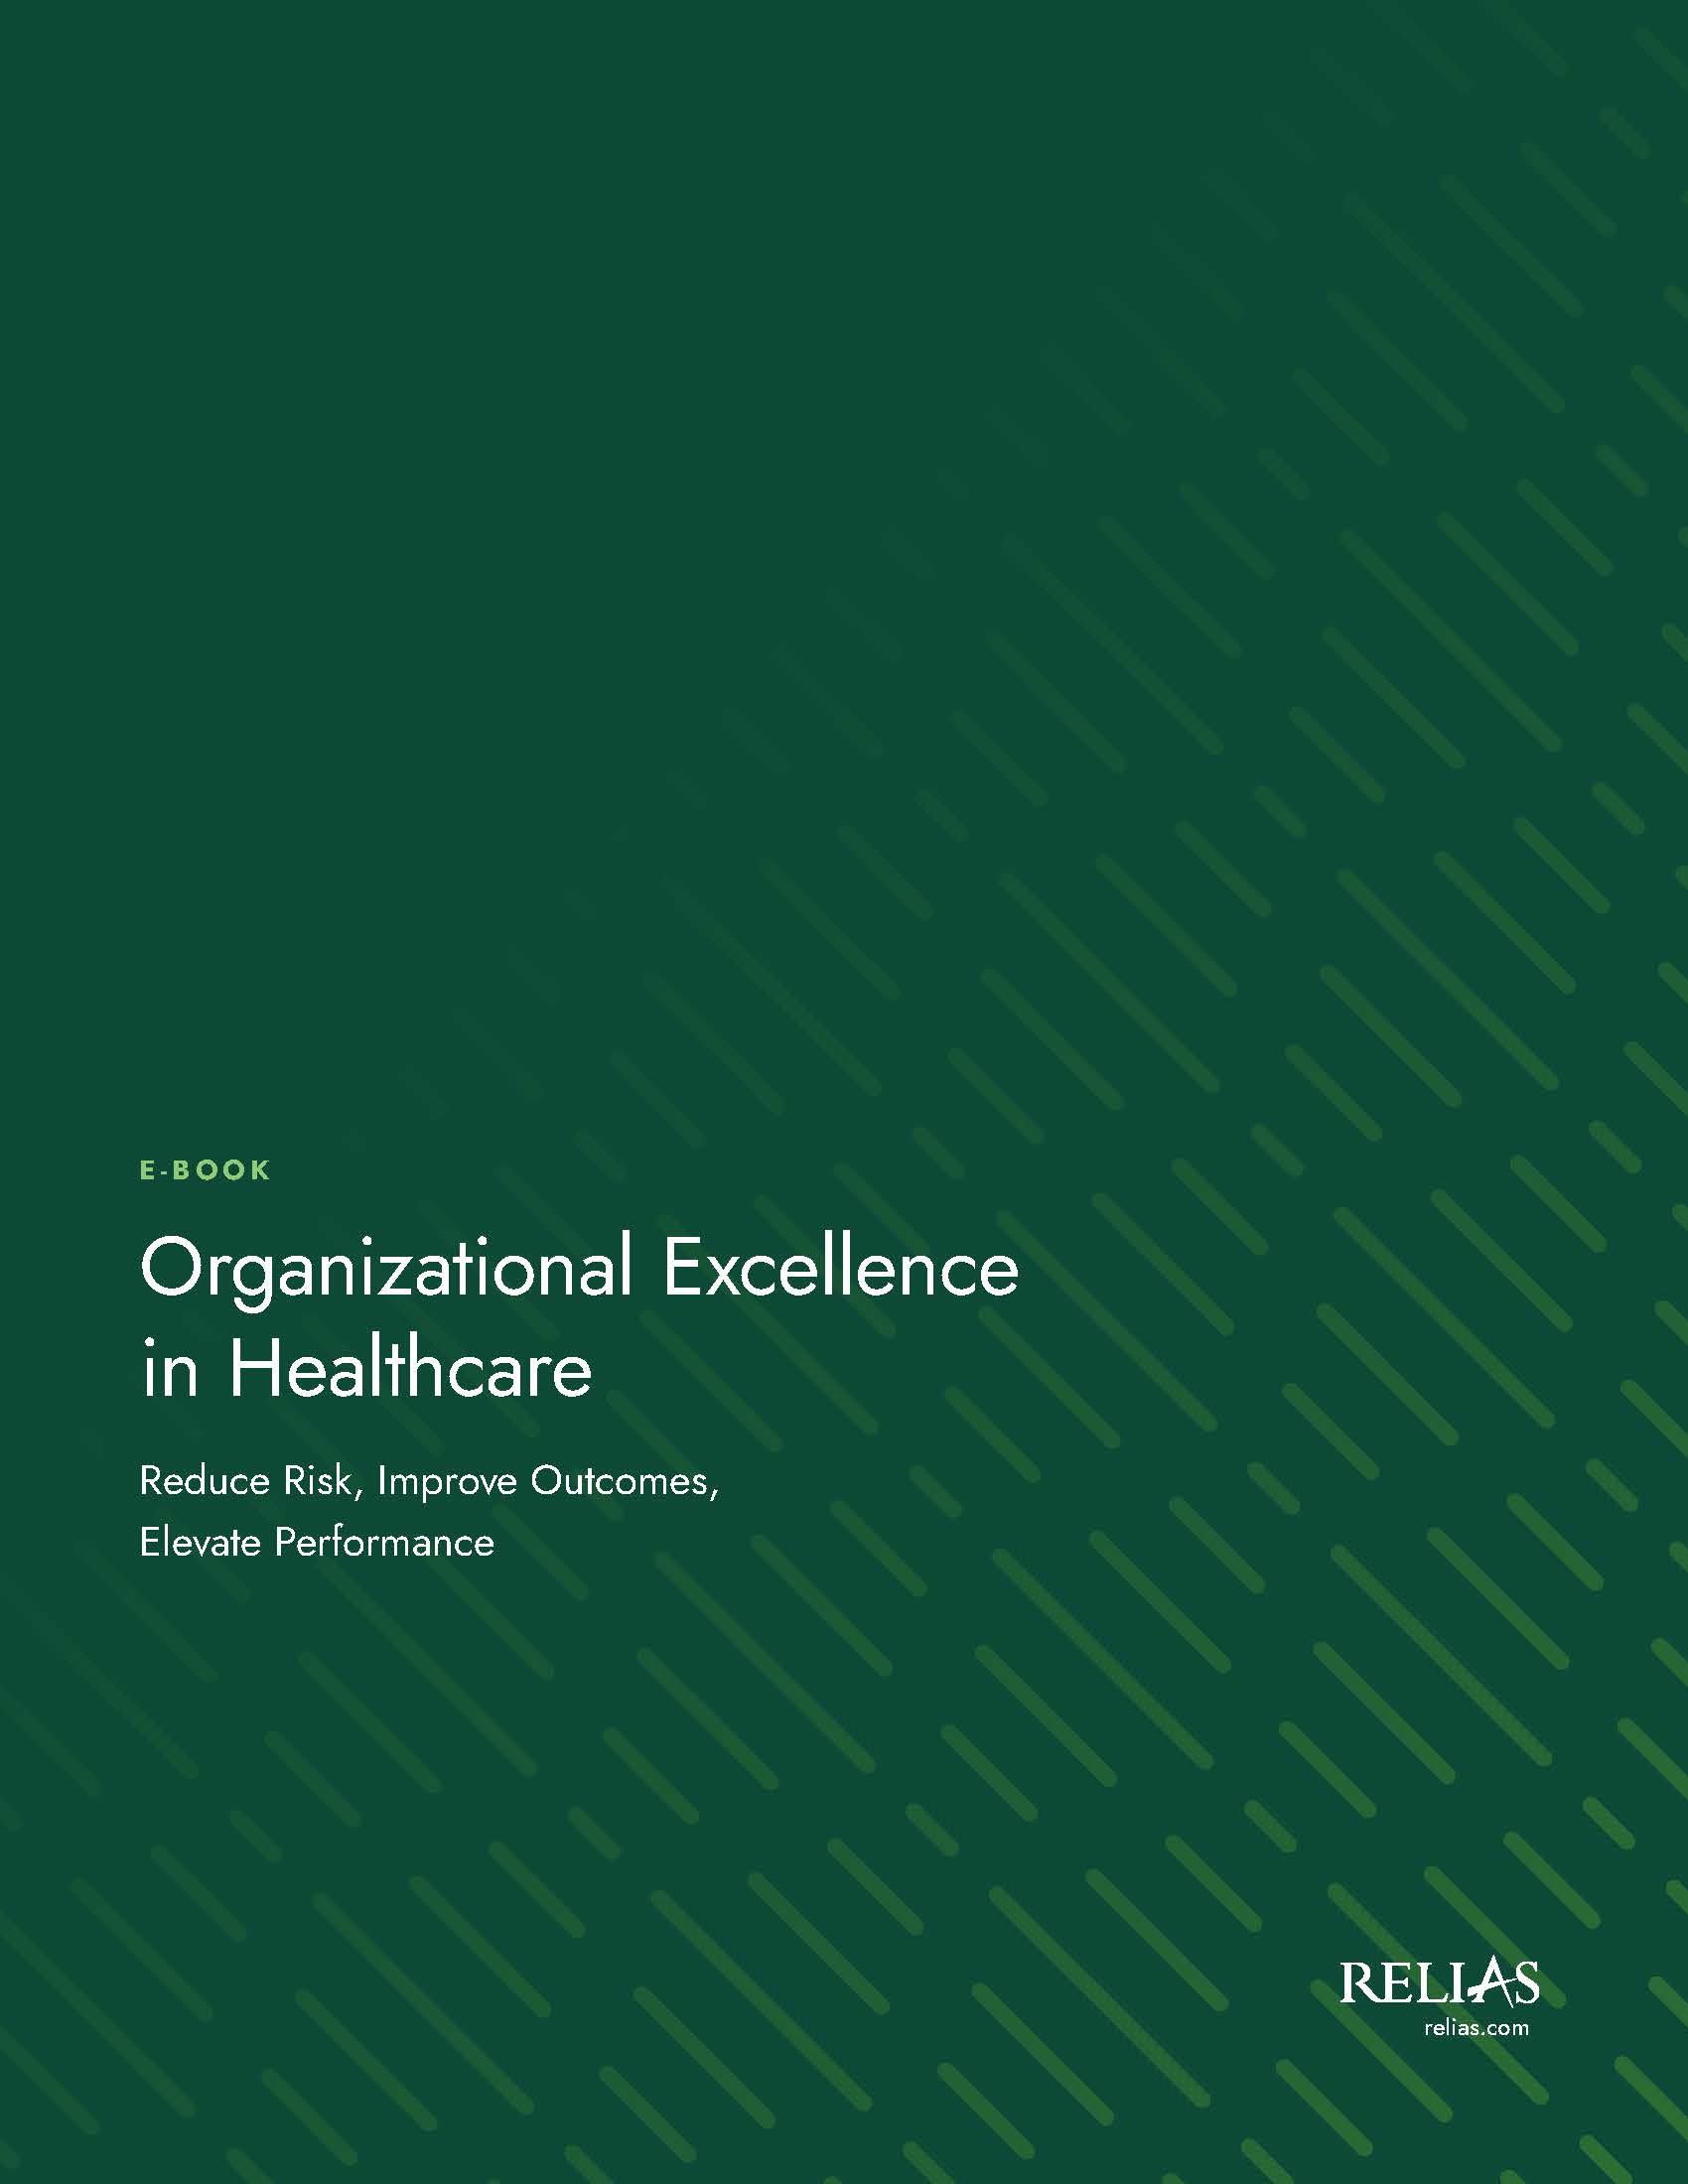 Organizational Excellence in Healthcare